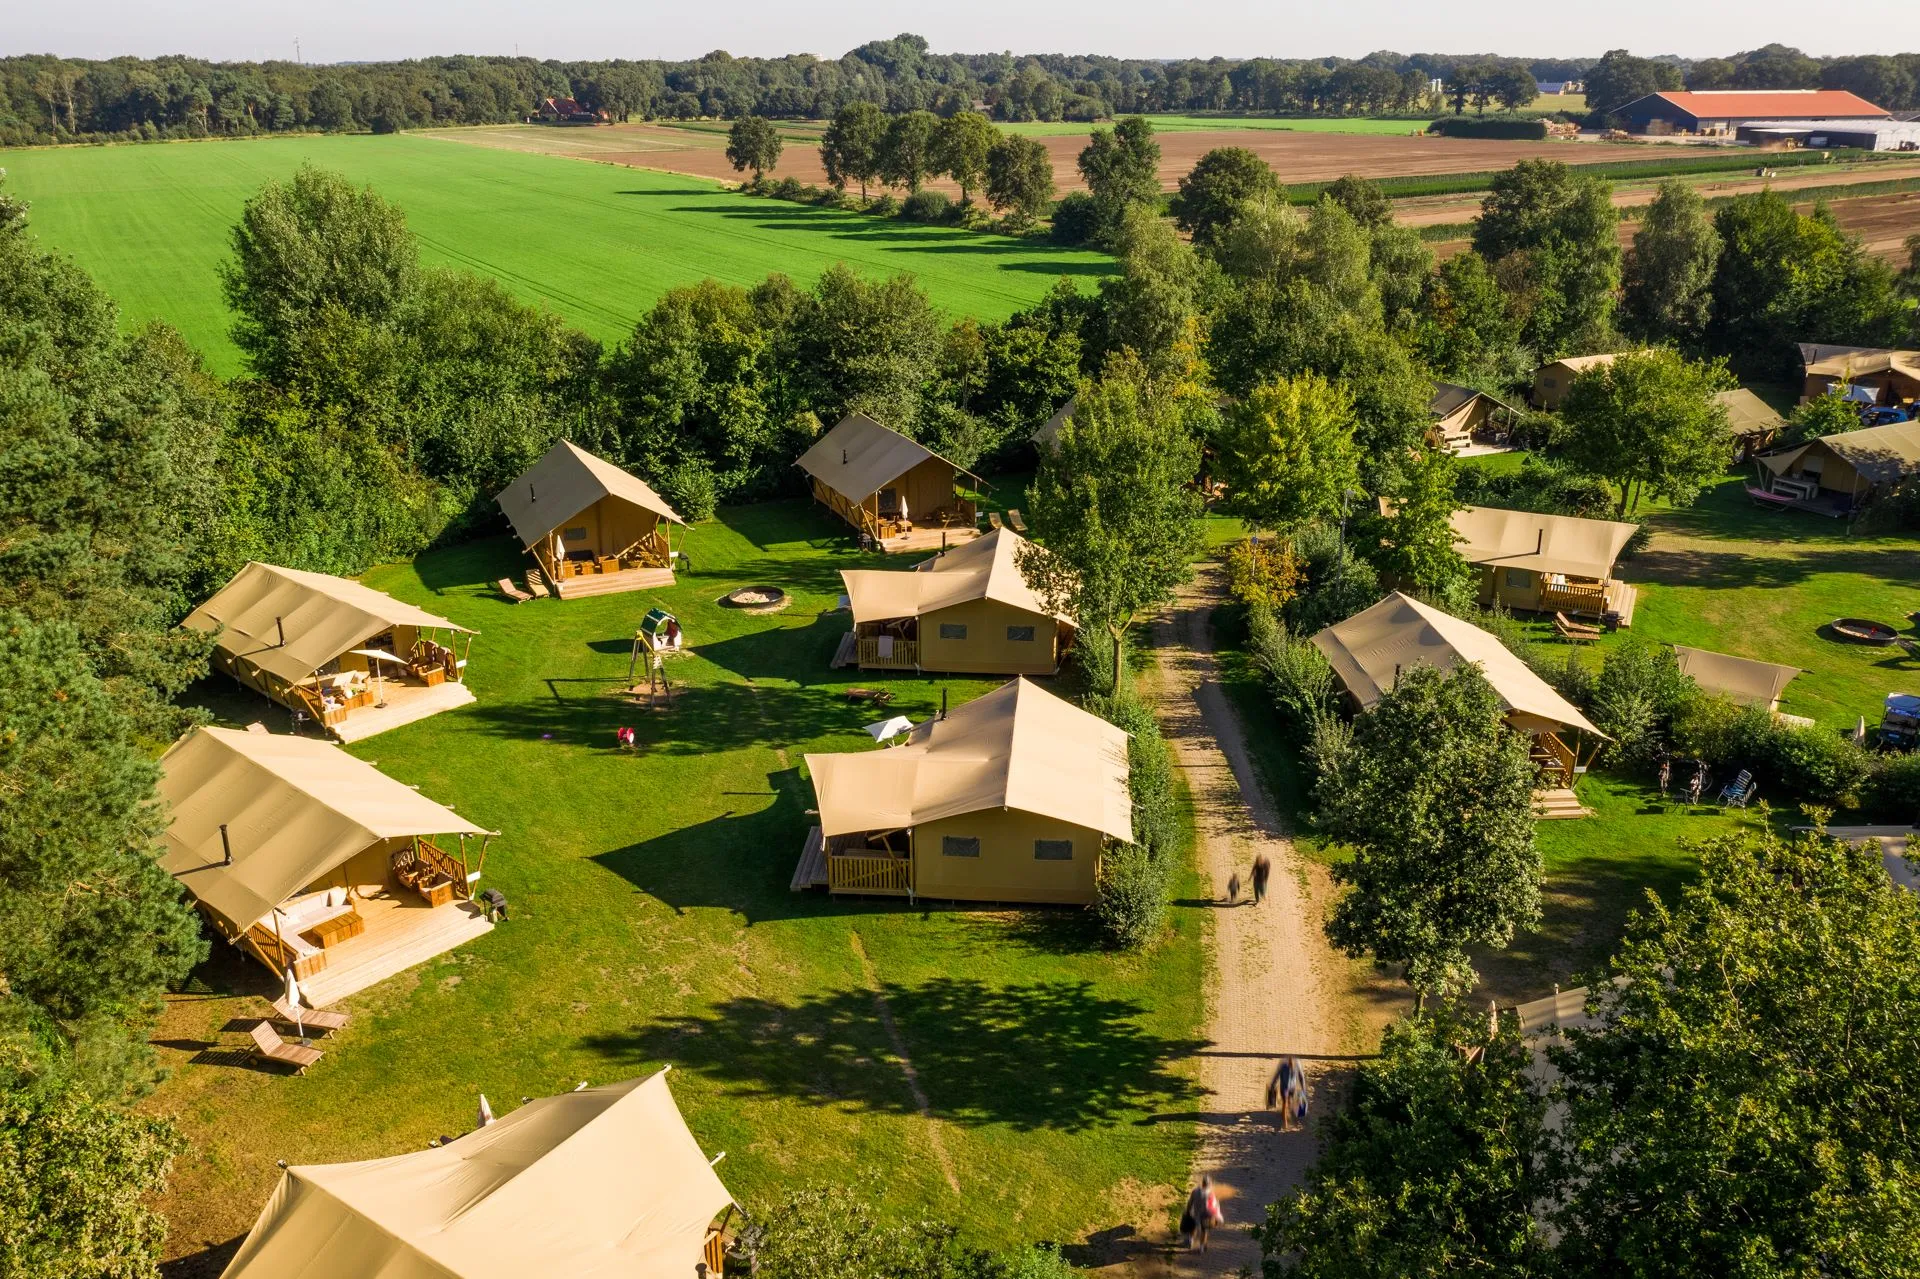 Vacanze col Cuore welcomes Dutch tourist in their own country | New Glamping